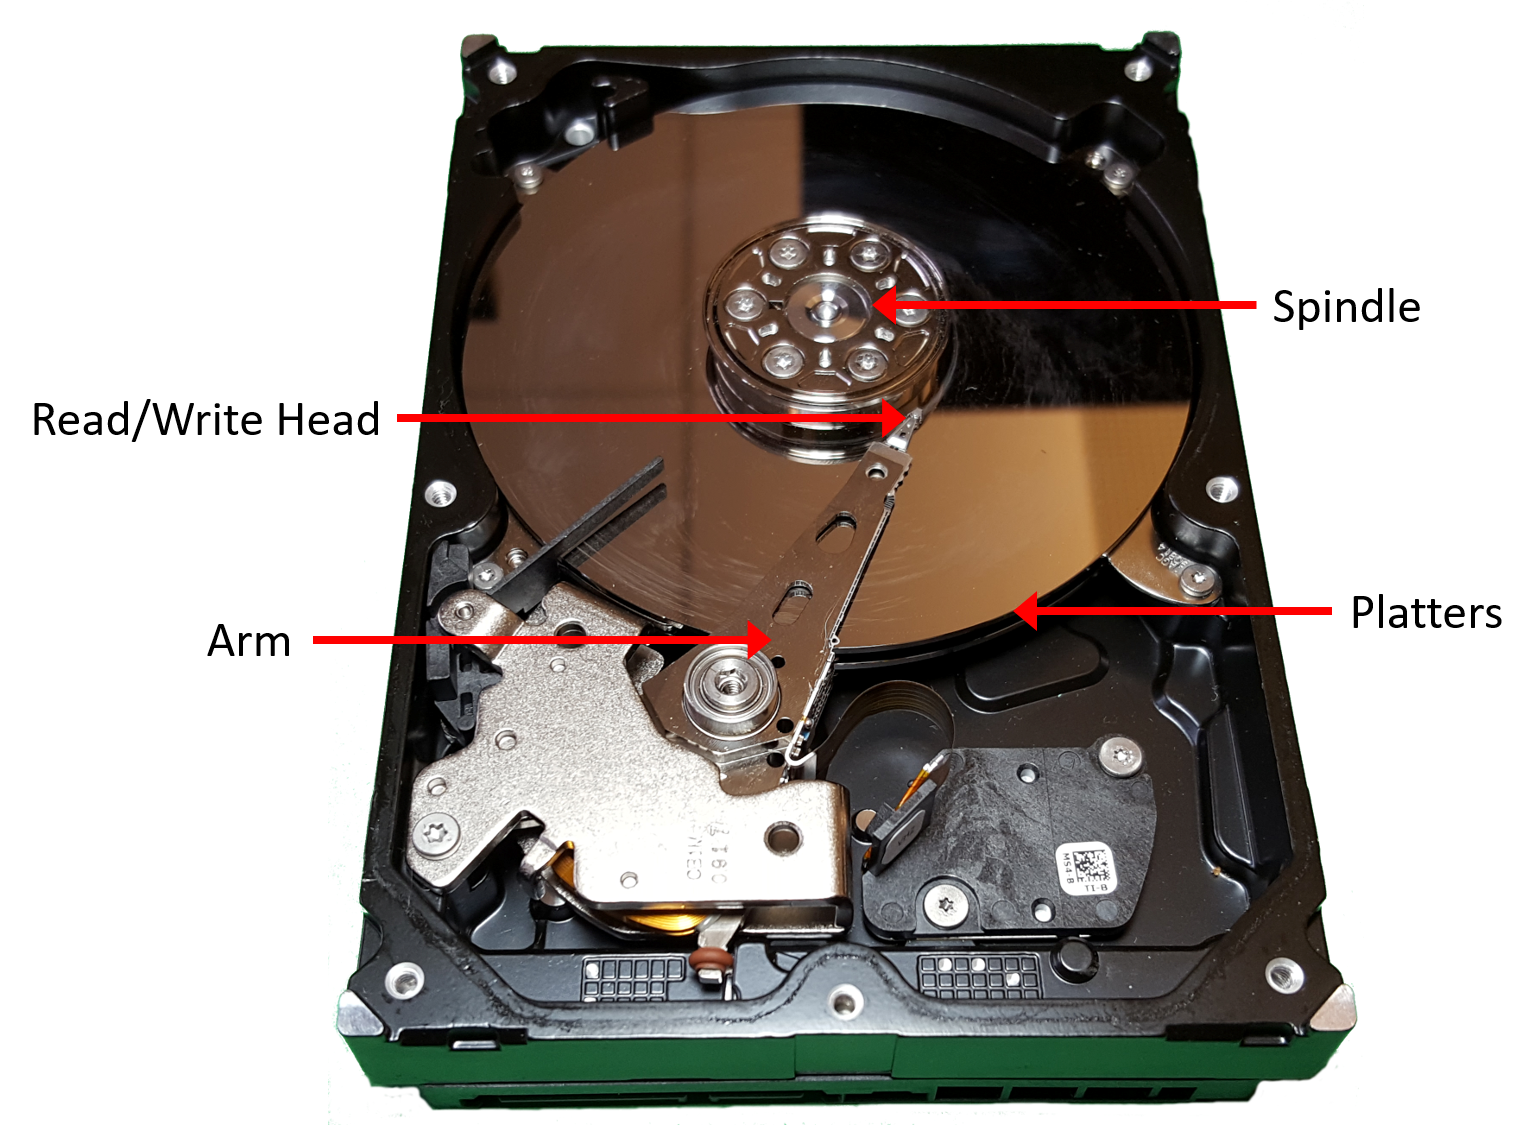 A photo of the internals of a hard disk with its parts labeled.